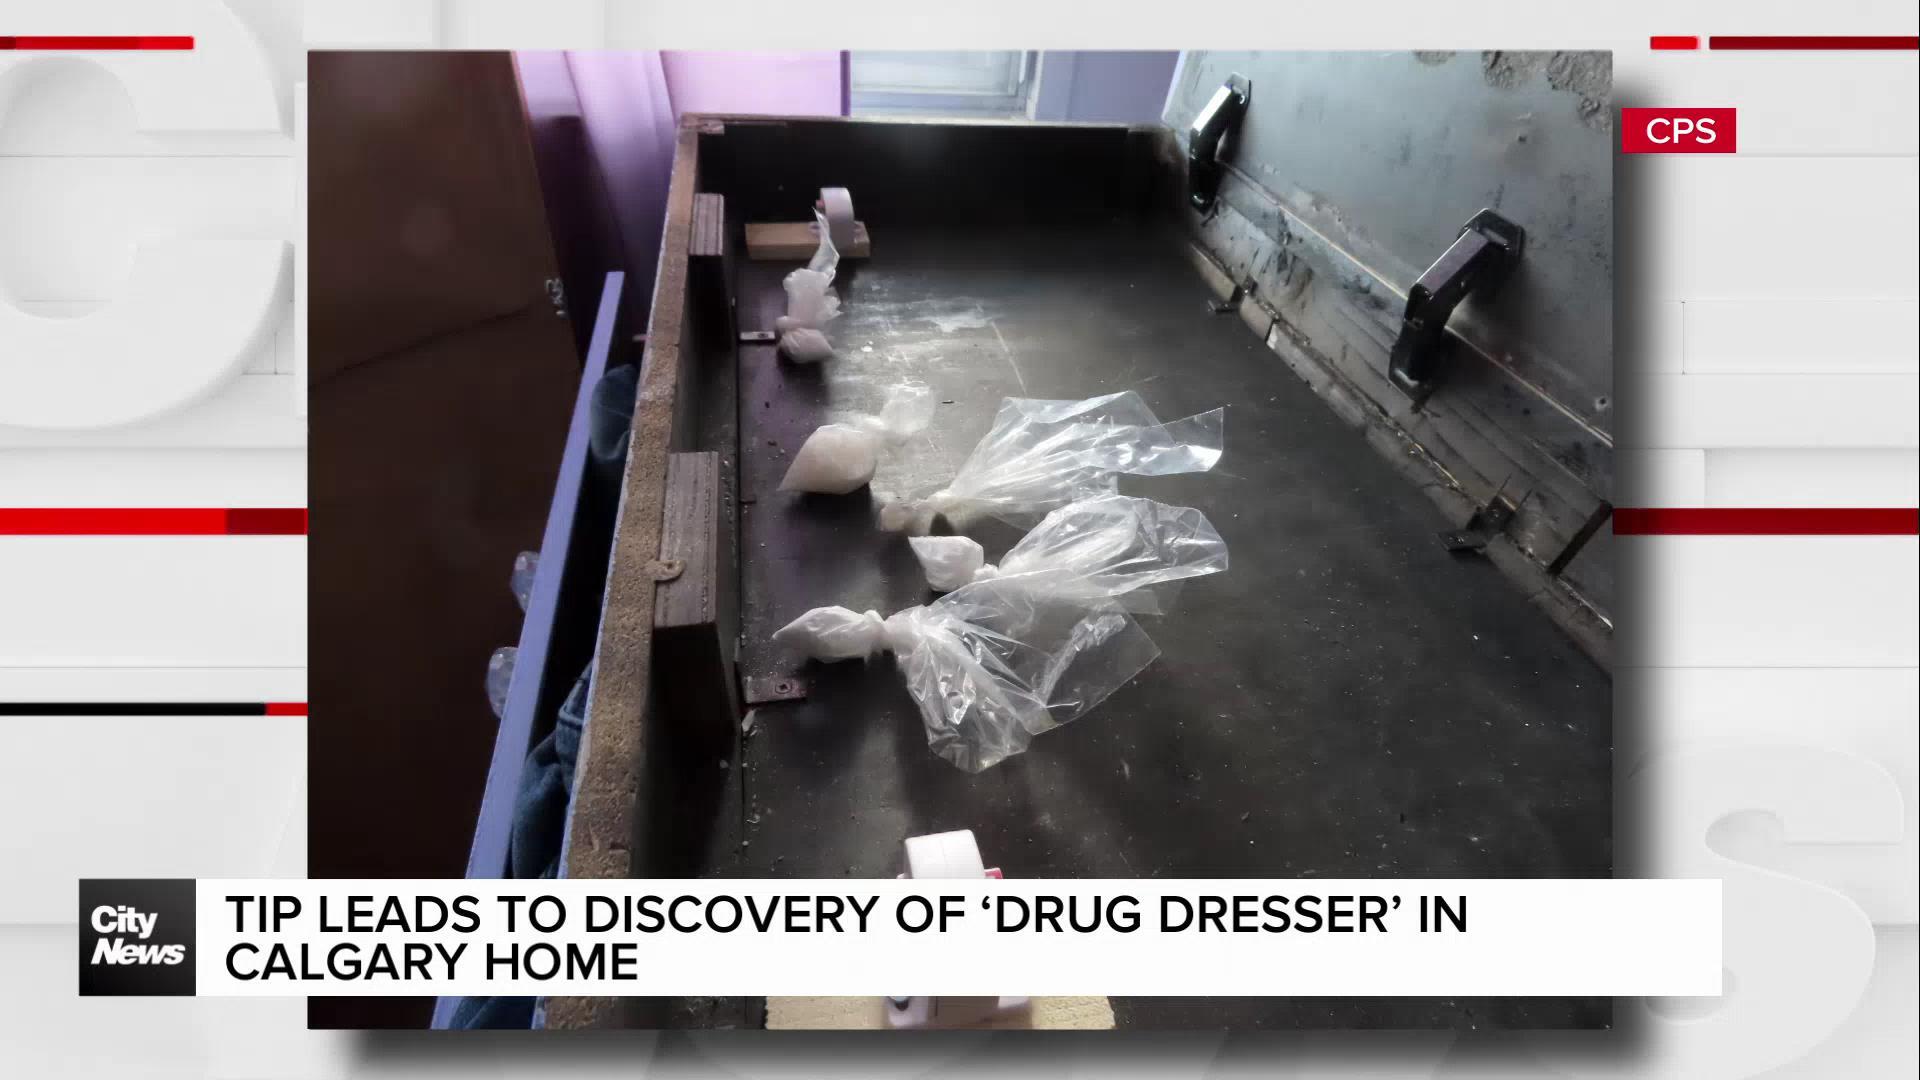 Tip leads to discovery of ‘drug dresser’ in Calgary home